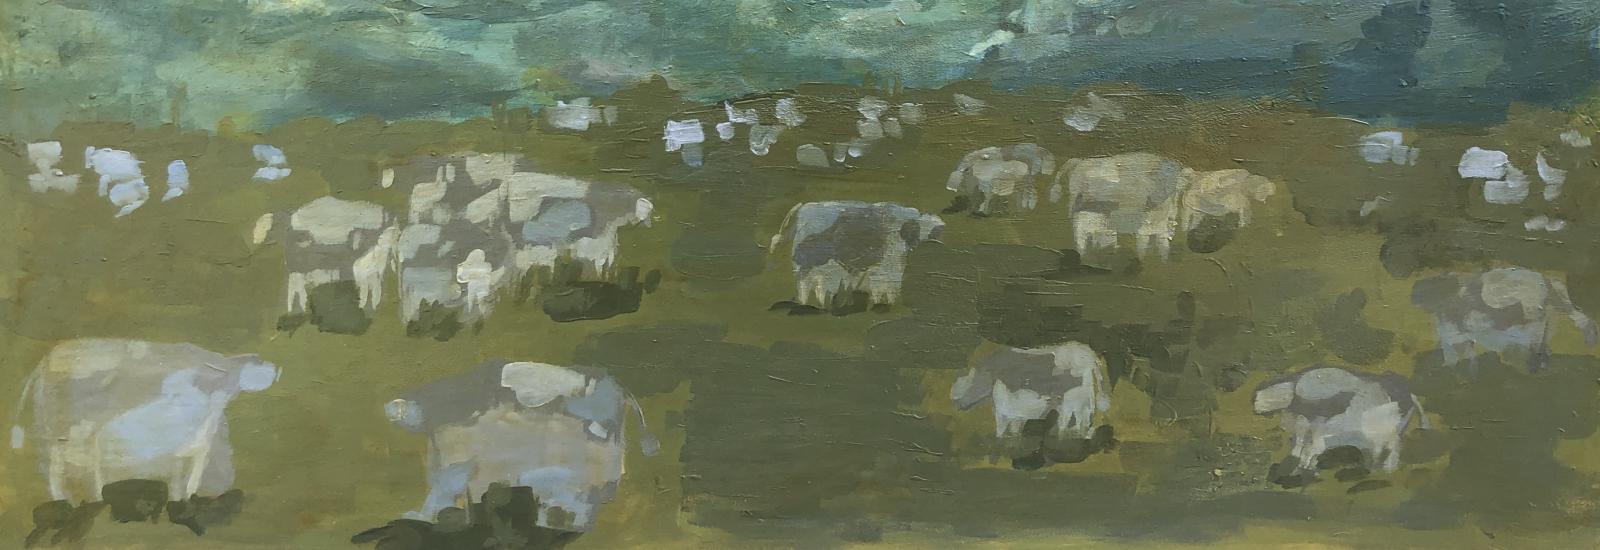 Image of a painting of livestock in a field under cloudy skies.